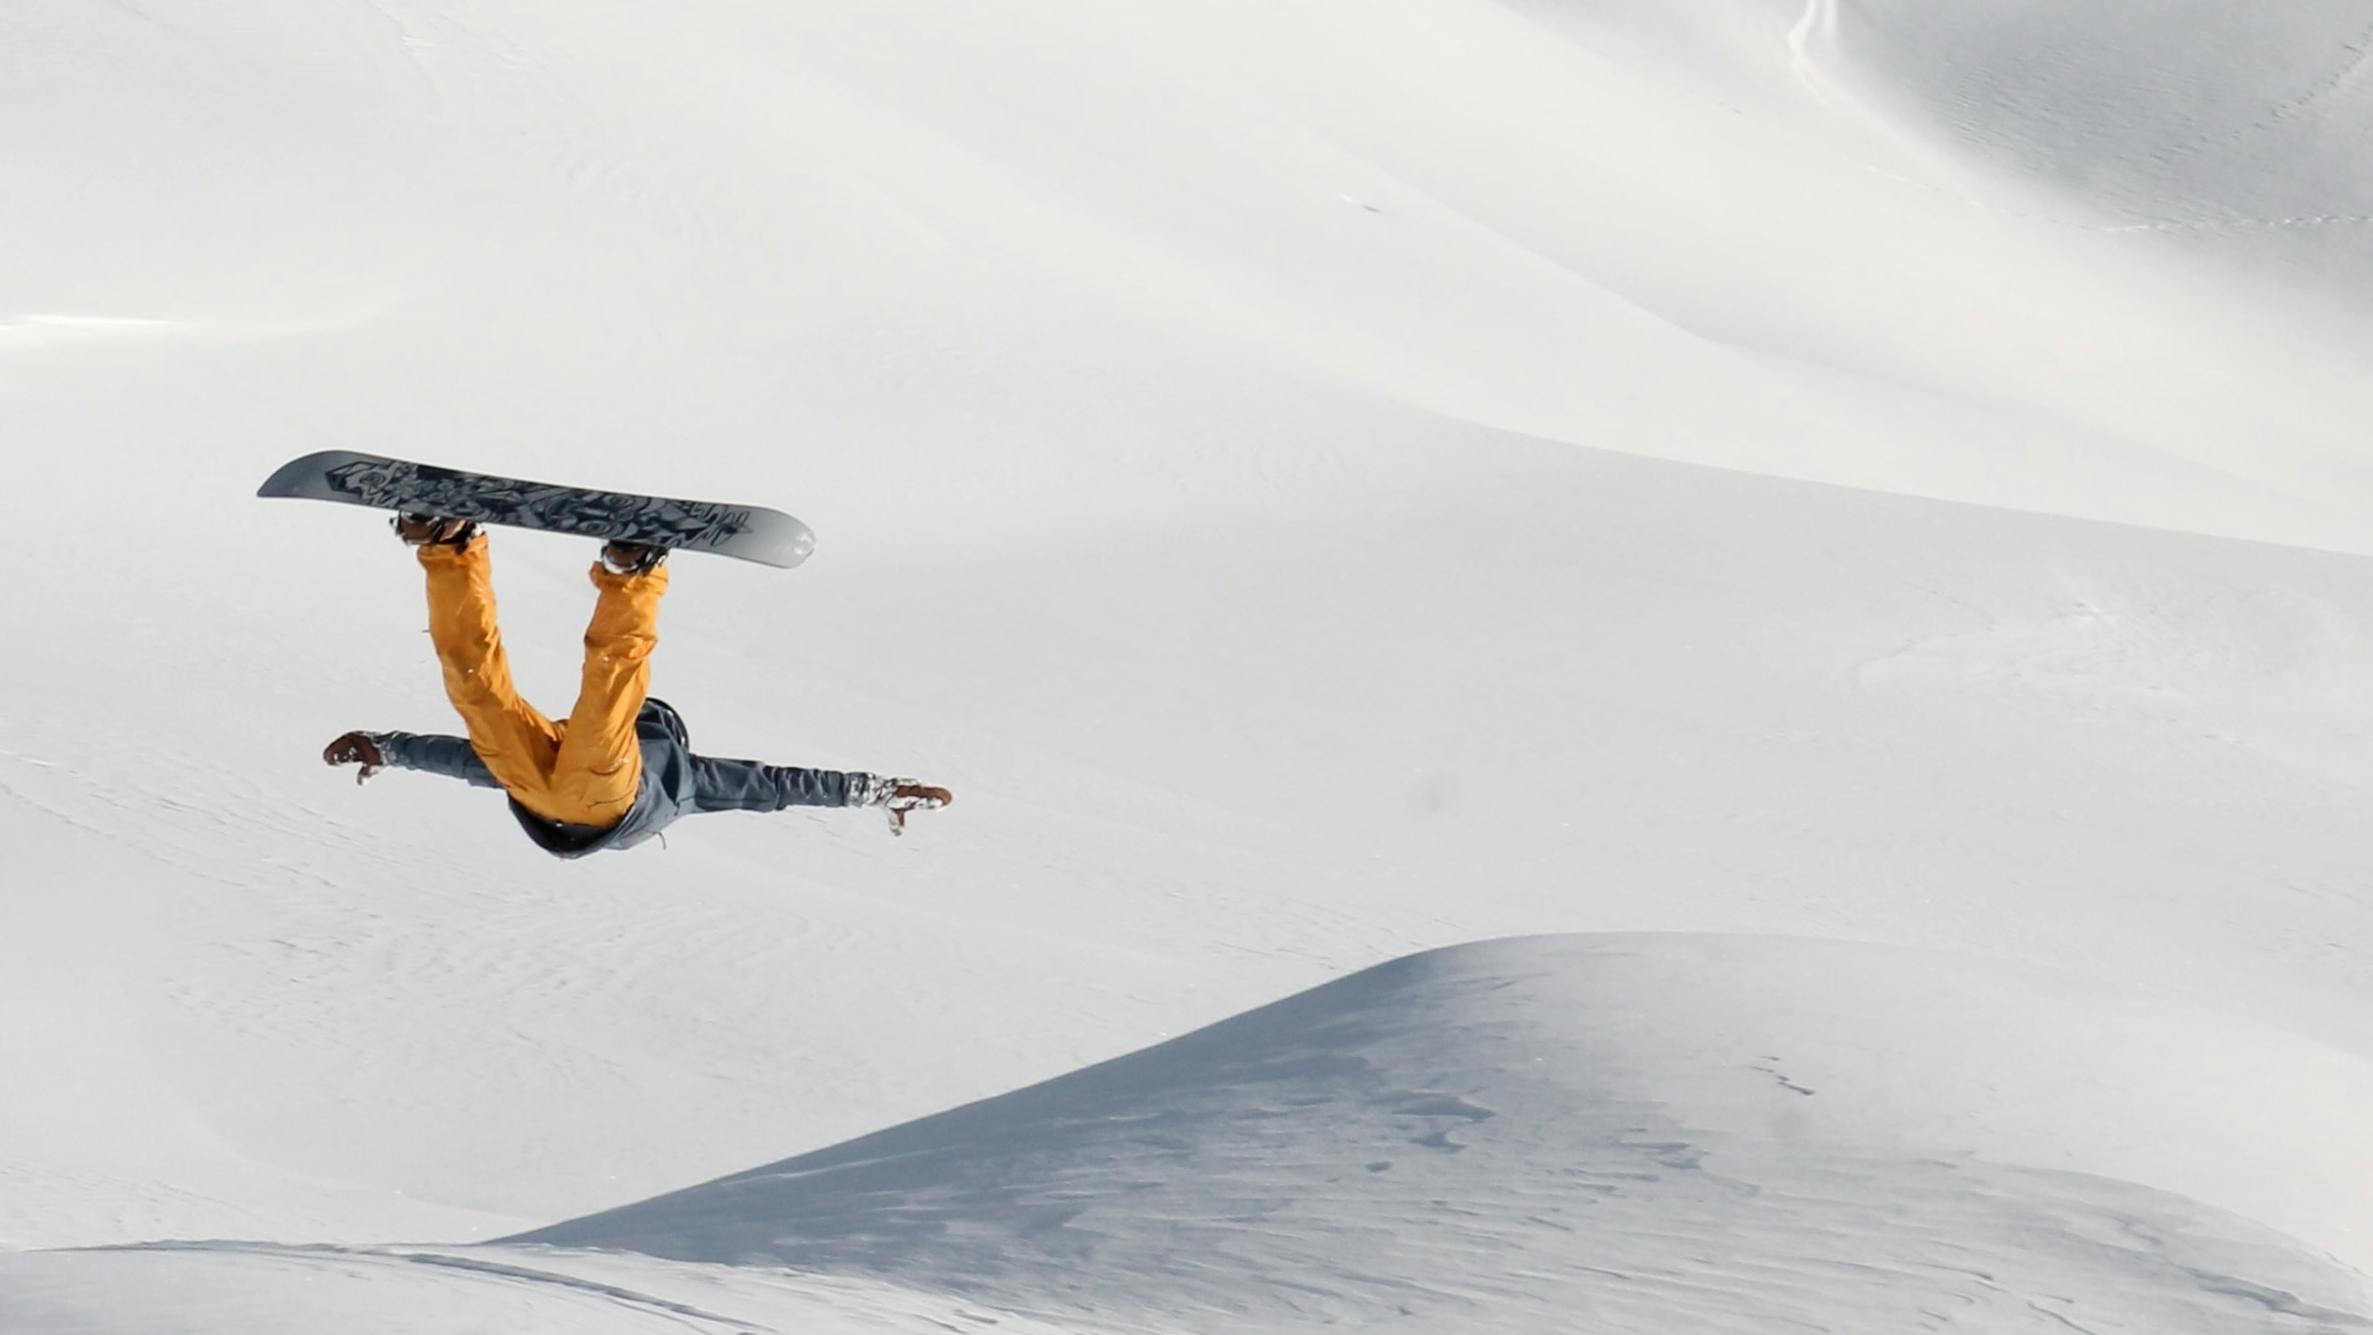 A snowboarder does a flip. 